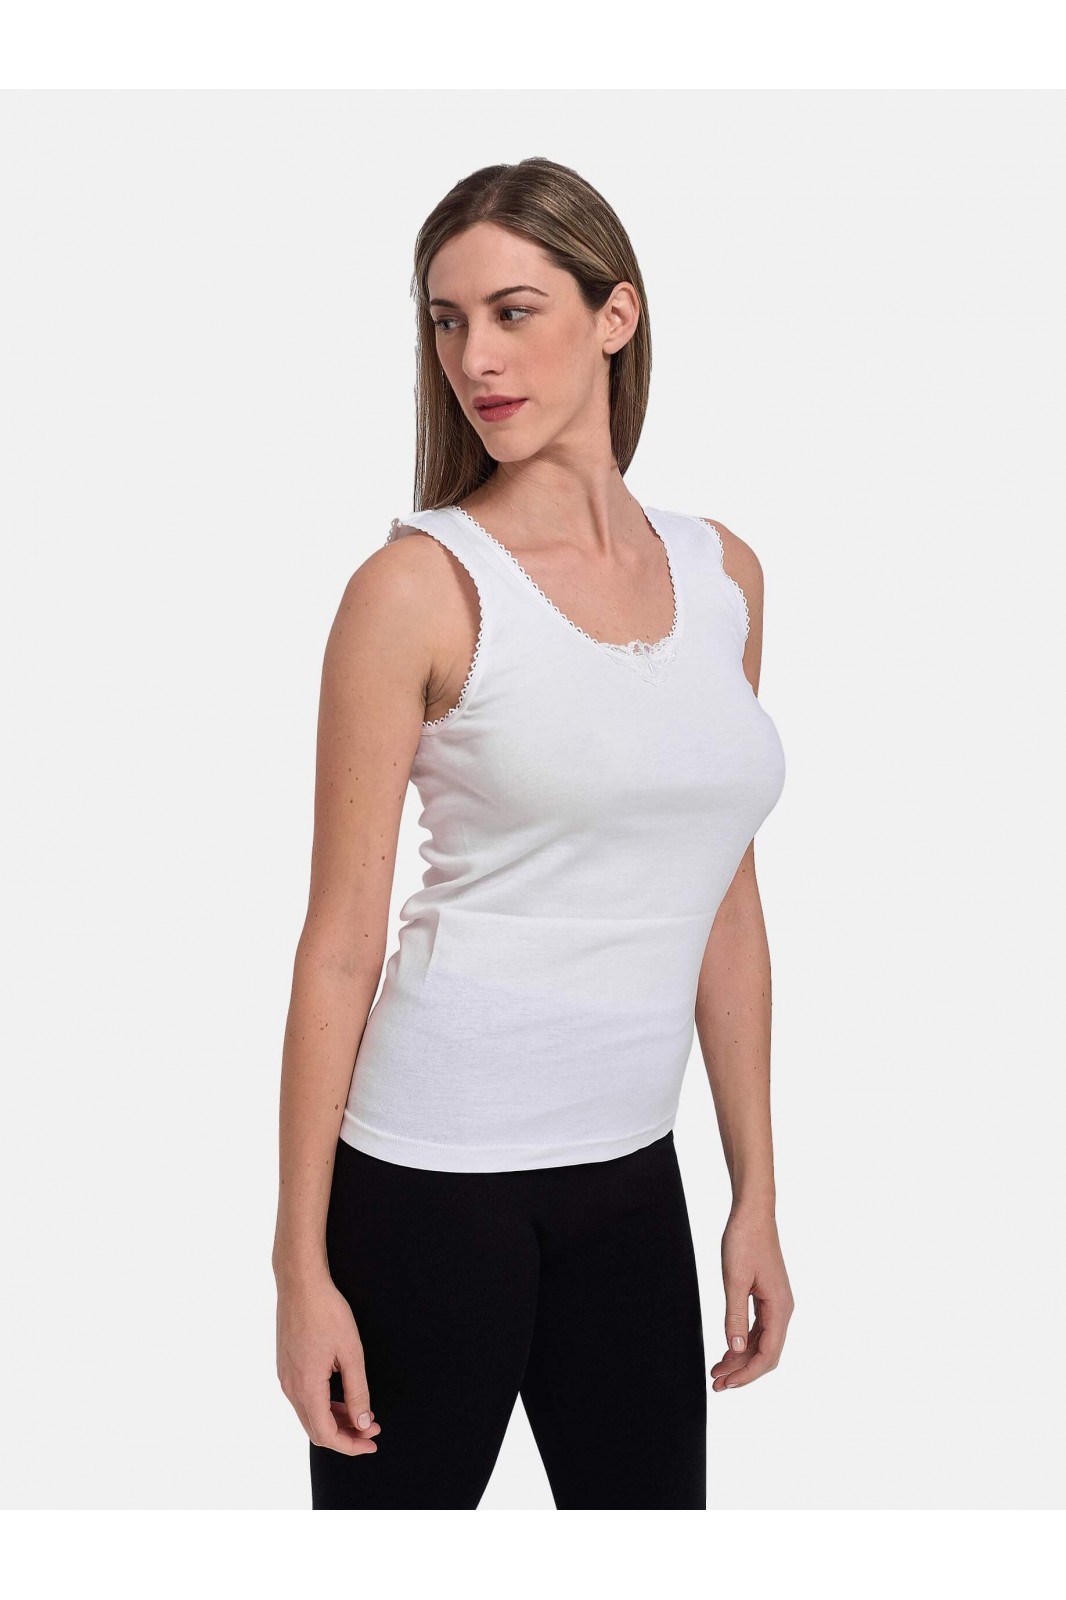 Classic undershirt with straps and motif - SOFT - 100% Cotton